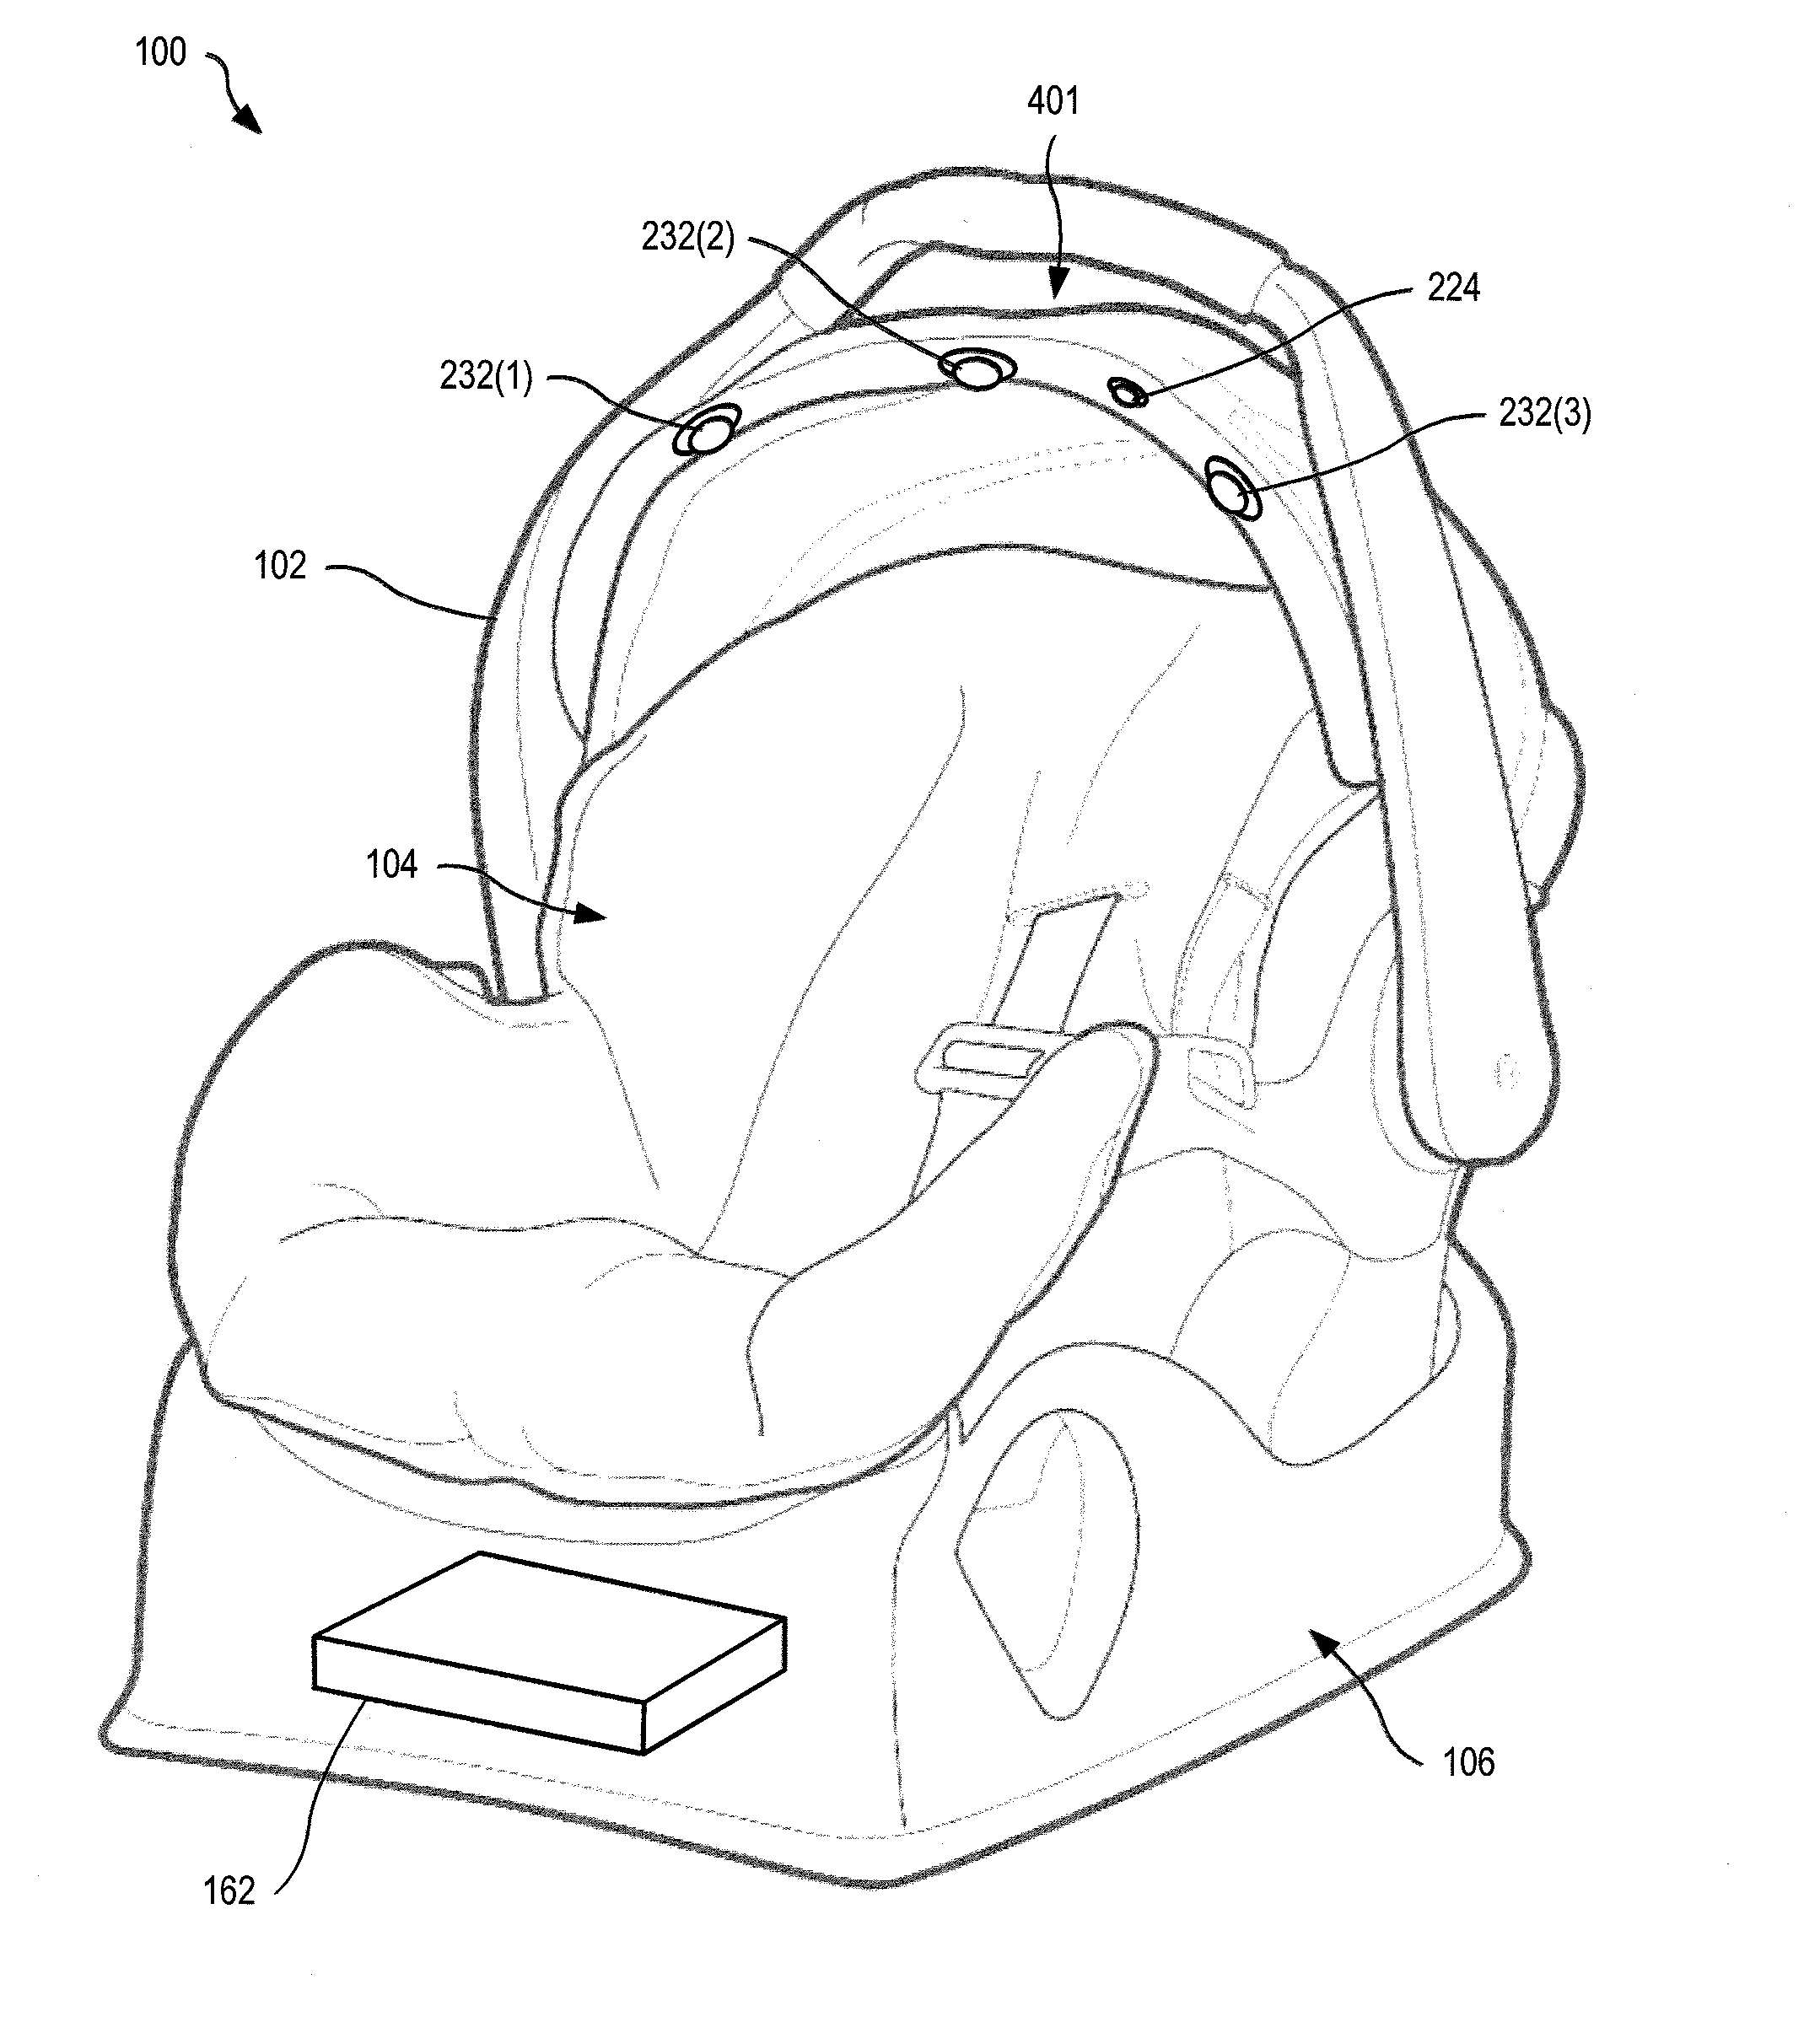 Systems for Soothing and Prolonging Sleep of a Child in a Car Seat